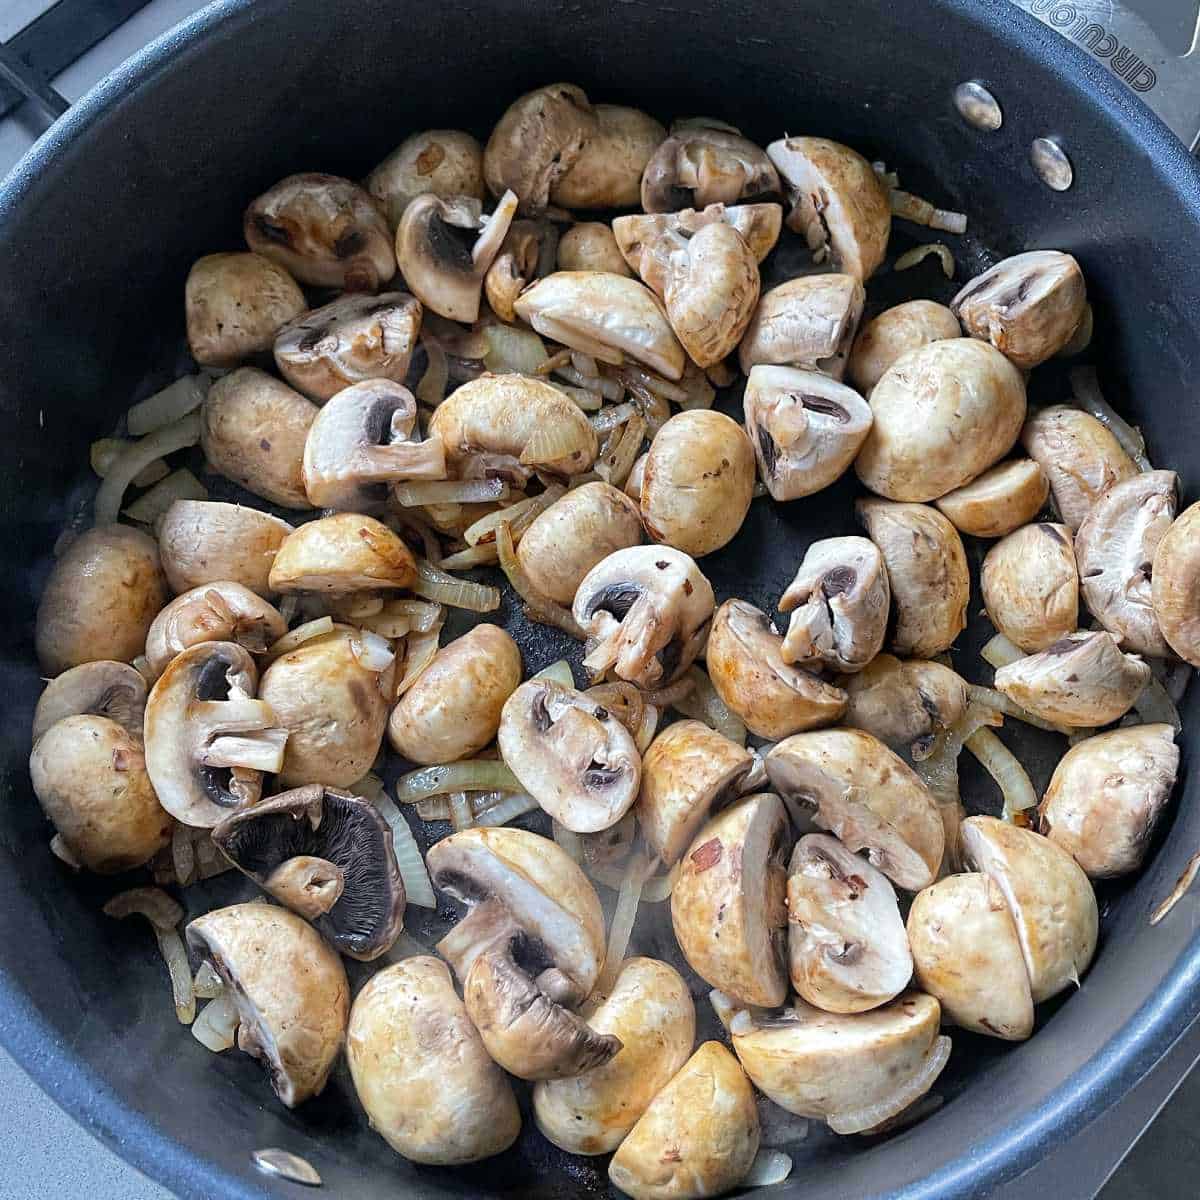 Sliced onion and mushrooms frying in a pan